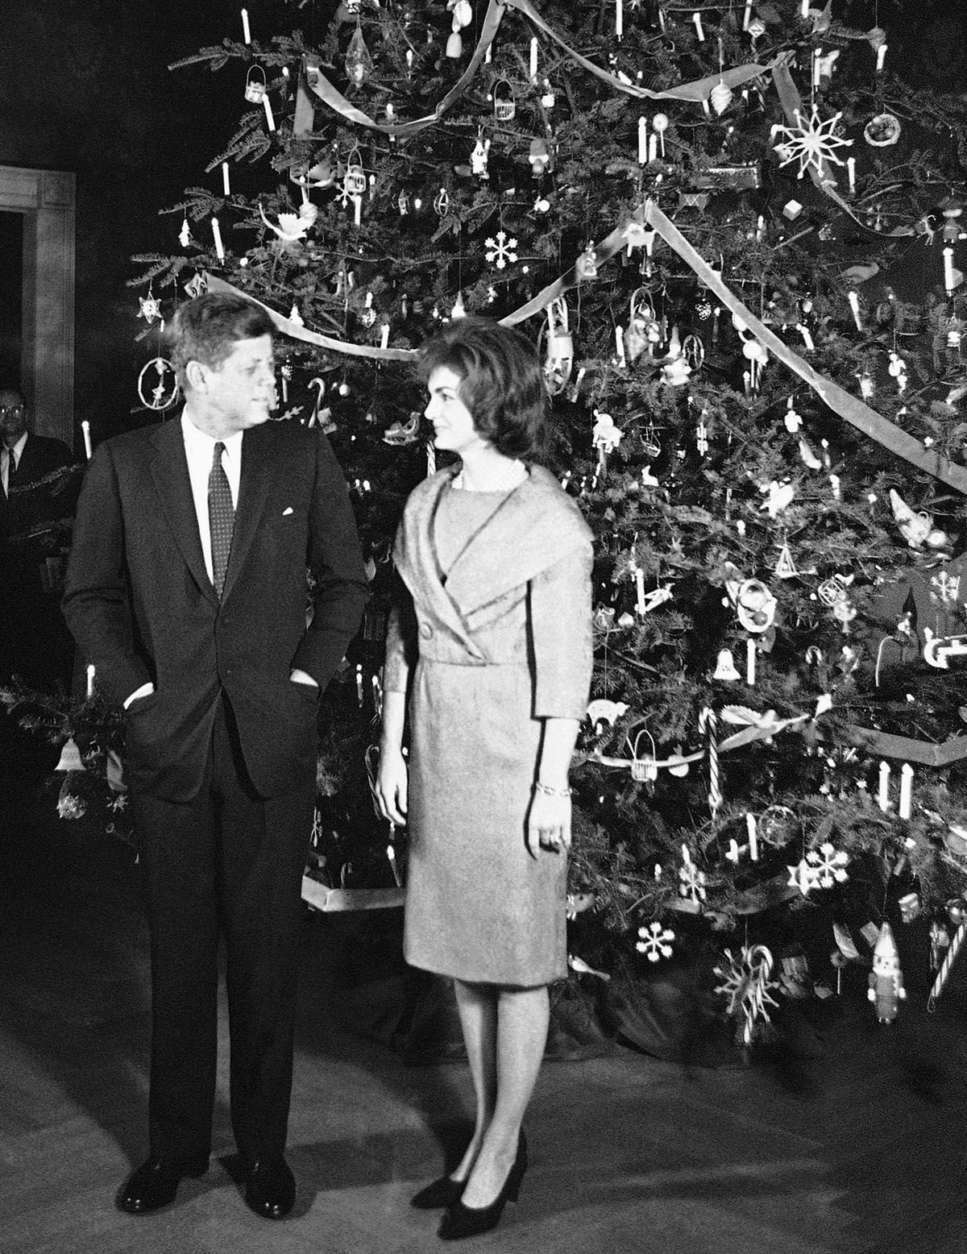 FILE - In this Dec. 13, 1961 file photo, President John F. Kennedy and his wife, Jacqueline, pose in front of the Christmas tree in the Blue Room of the White House in Washington. The occasion was a pre-Christmas party for White House staff members and their families. (AP Photo/Henry Burroughs)